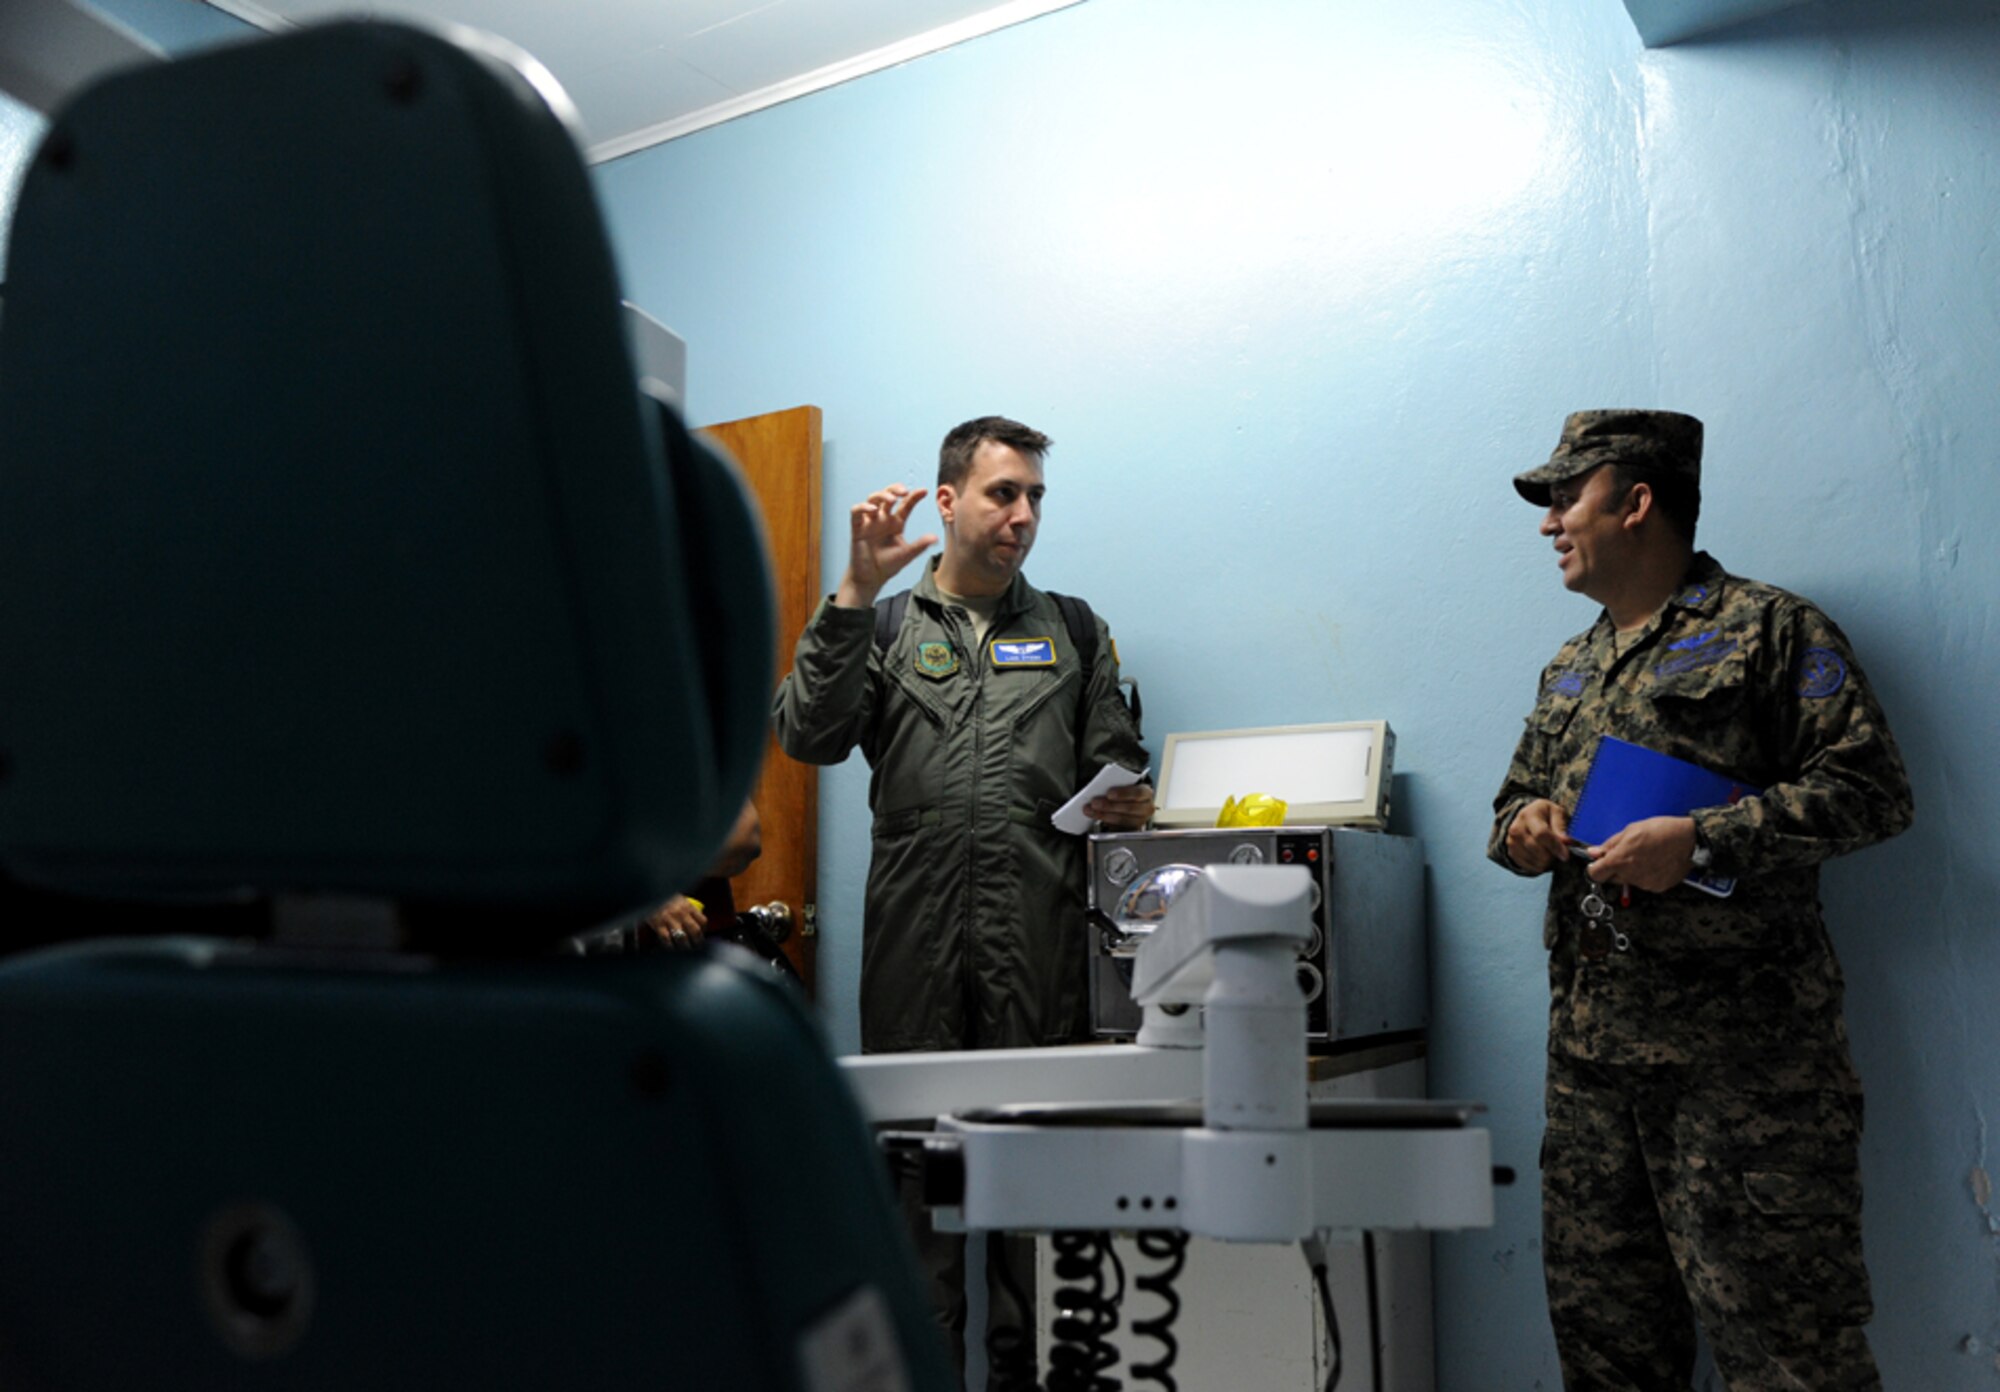 Major Luis Otero, a flight surgeon with the 60th Medical Operations Group discusses the dental equipment used in the clinic with a Honduran officer at Acosta Mejia Air Force Base, Tegucigalpa, Honduras on July 17, 2012.  Over the next 30 days Otero will meet with many Honduran clinic administrators to trade ideas and experiences to help each other as part of efforts to build partner capacity in between the U.S. and Honduran air forces.  (U.S. Air Force photo/Staff Sgt. James Stewart)